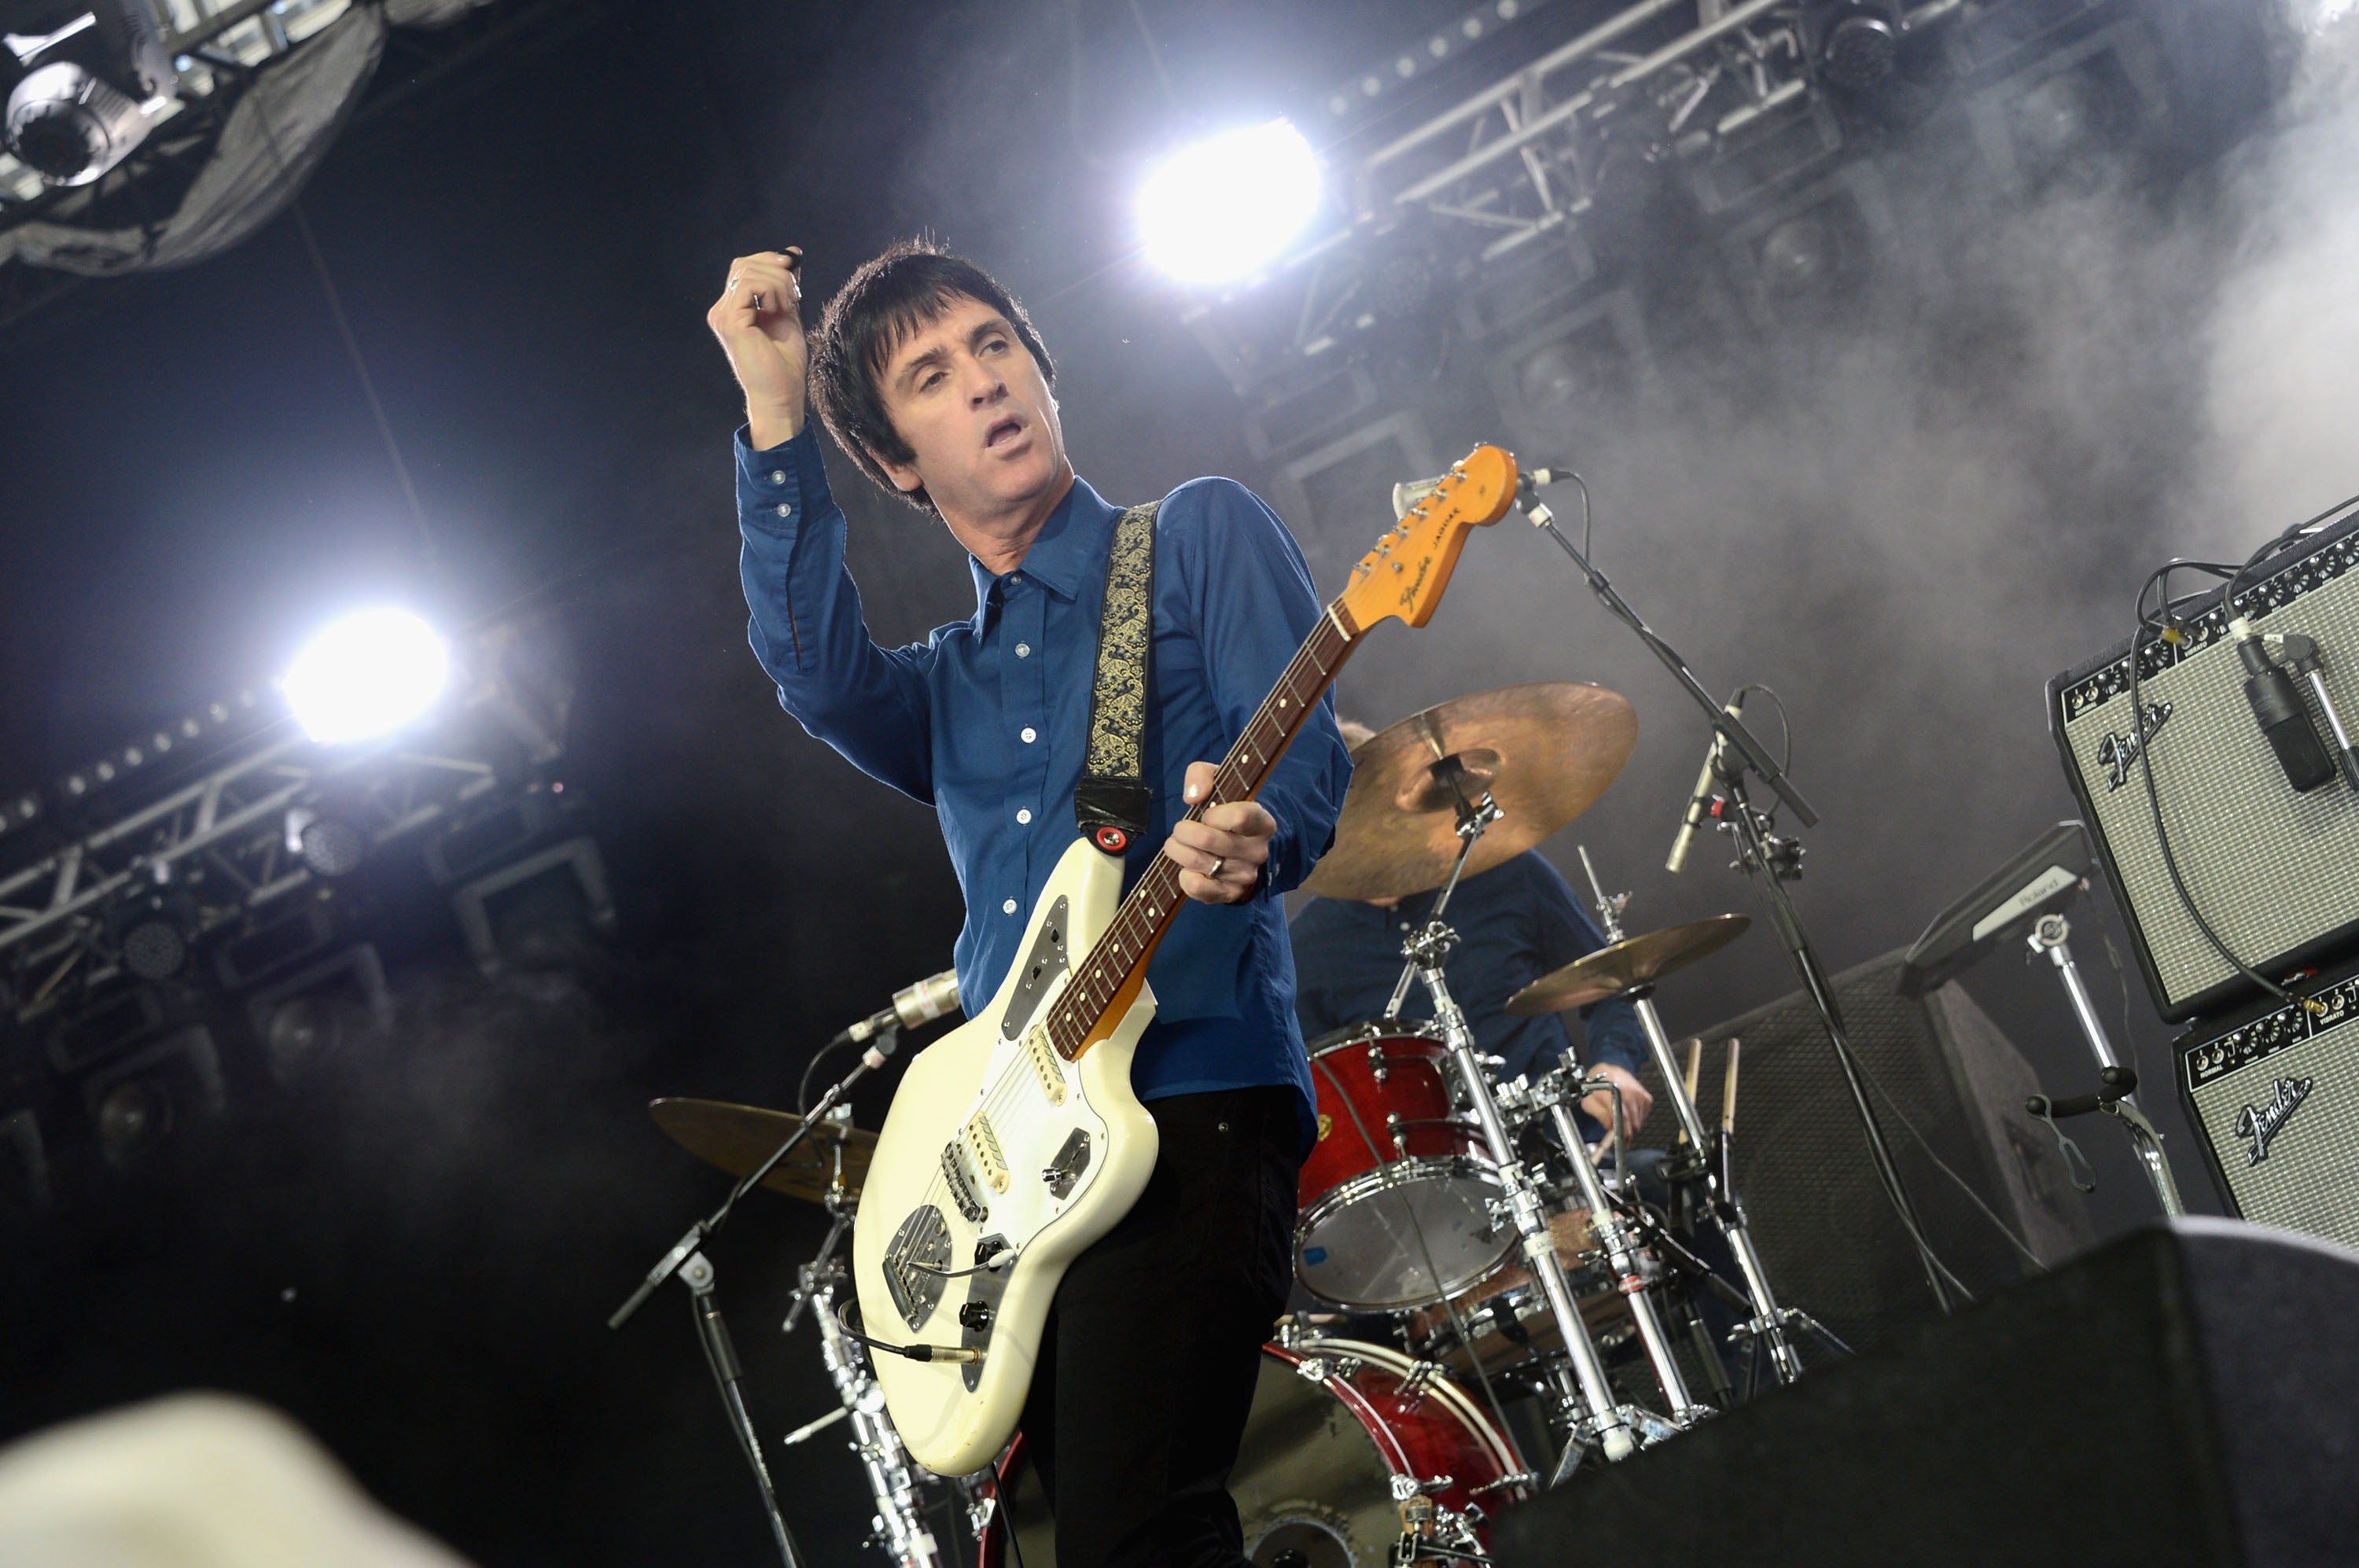 Marr performs at Coachella in 2013